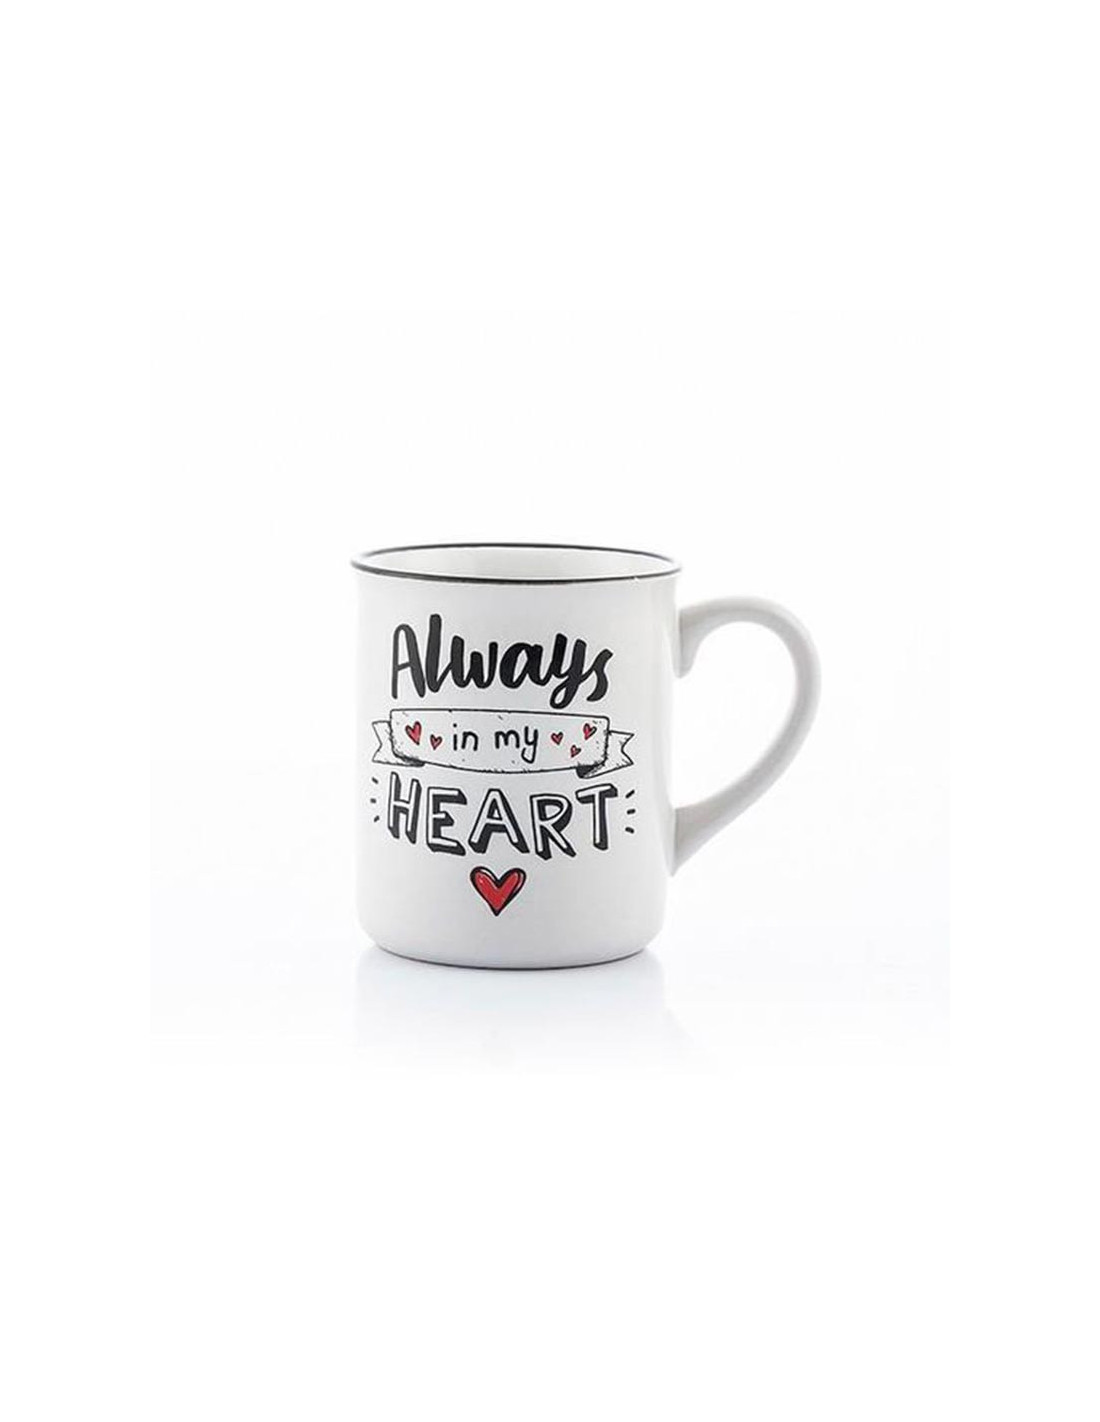 Out Of The Blue Mug Always in my heart 9TLJwbfP